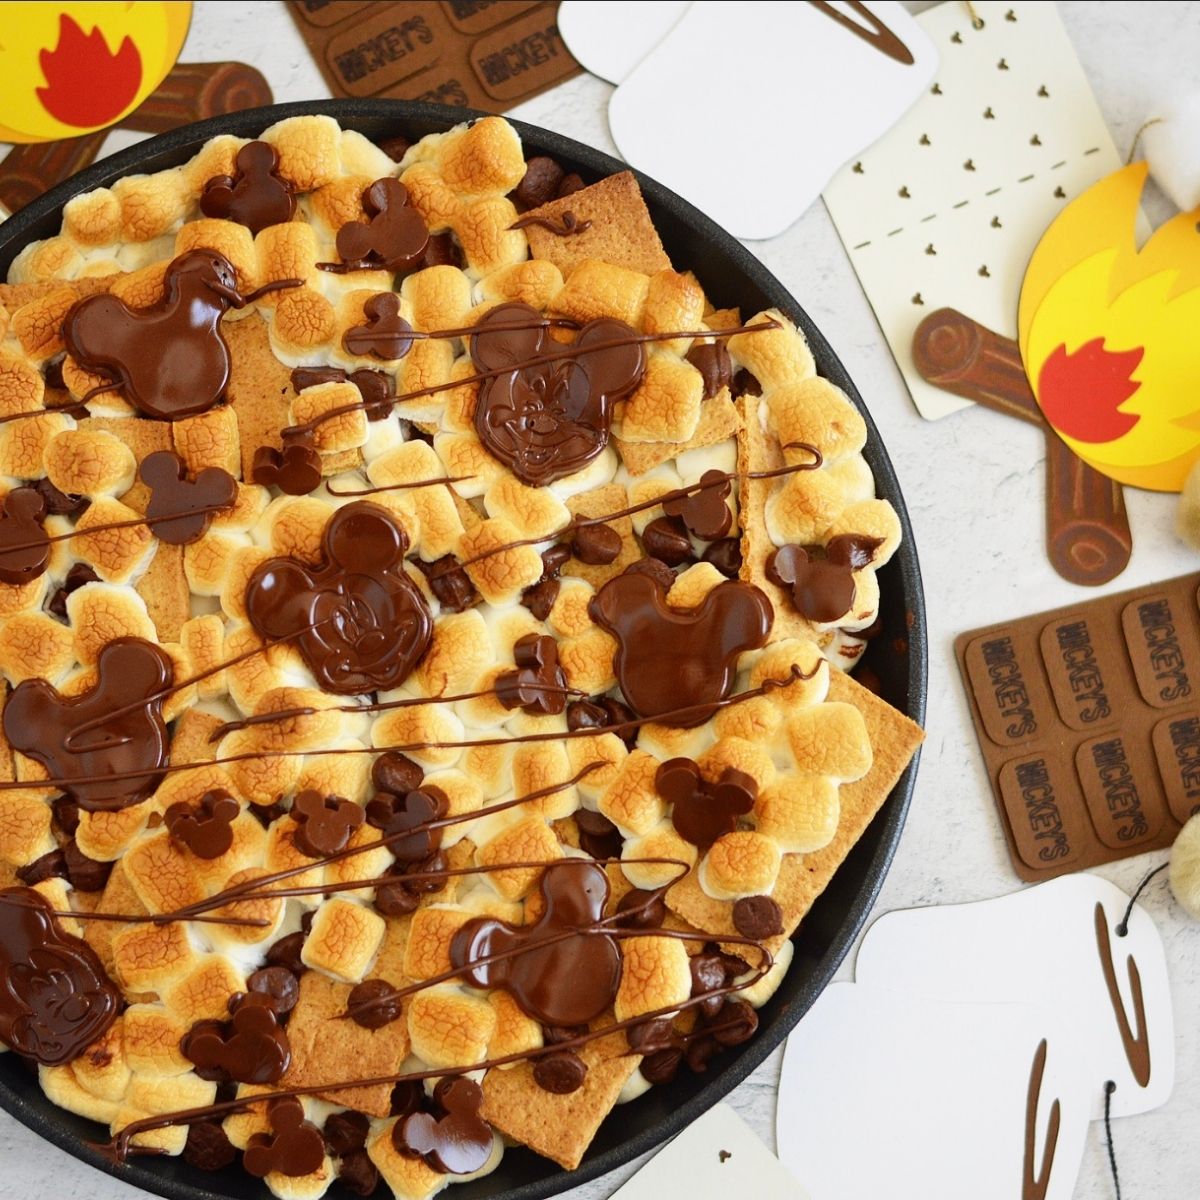 These S'mores Nachos are so easy to make.  Graham crackers, chocolate chips and marshmallows are the only ingredients you need to make this fun, summer treat.